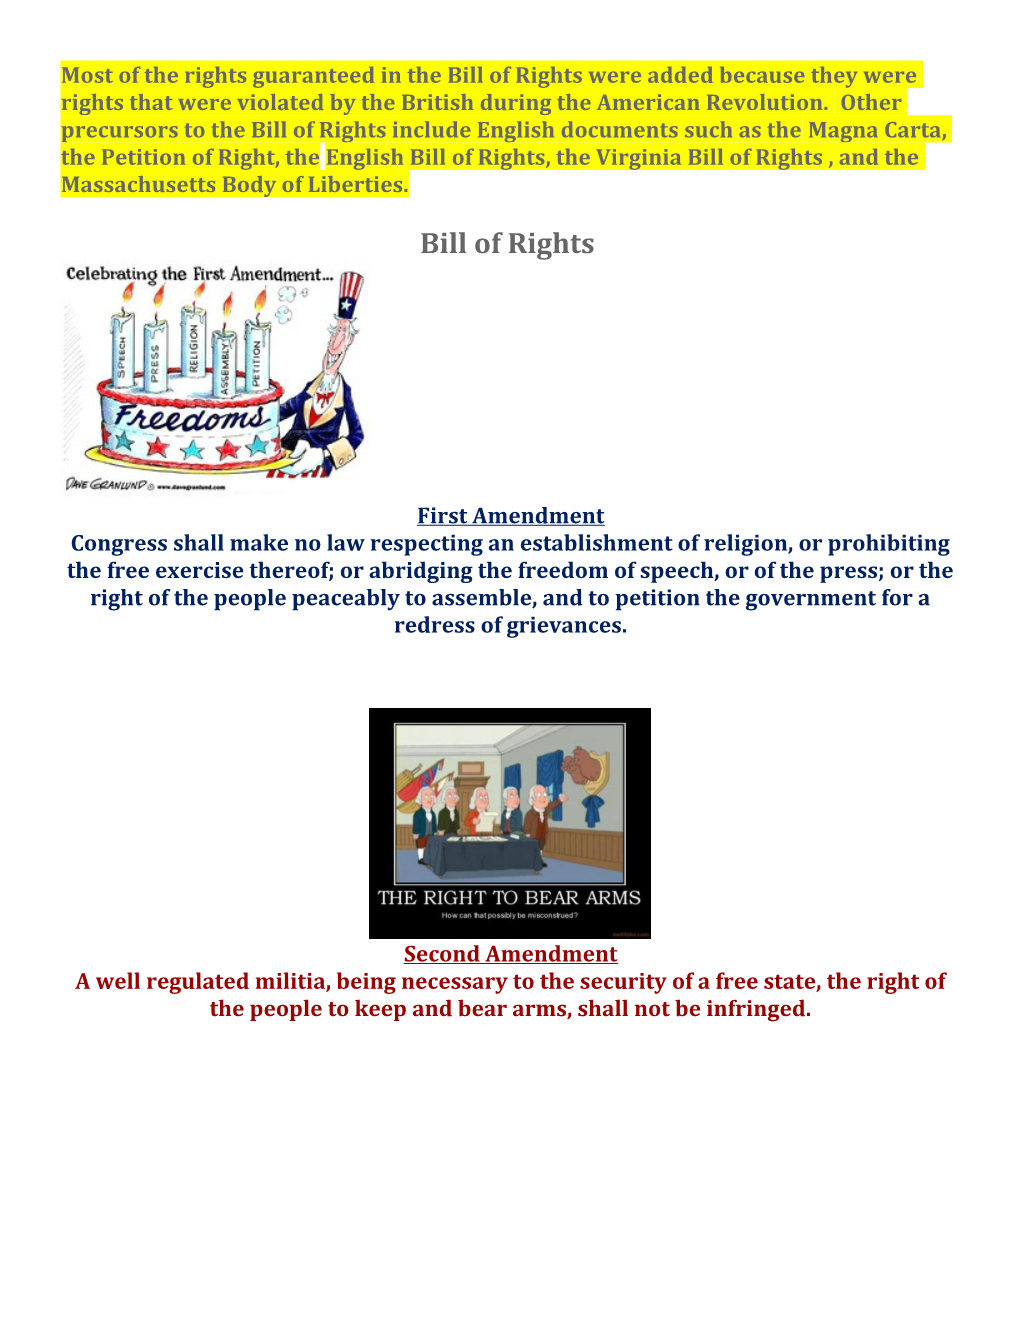 Most of the Rights Guaranteed in the Bill of Rights Were Added Because They Were Rights